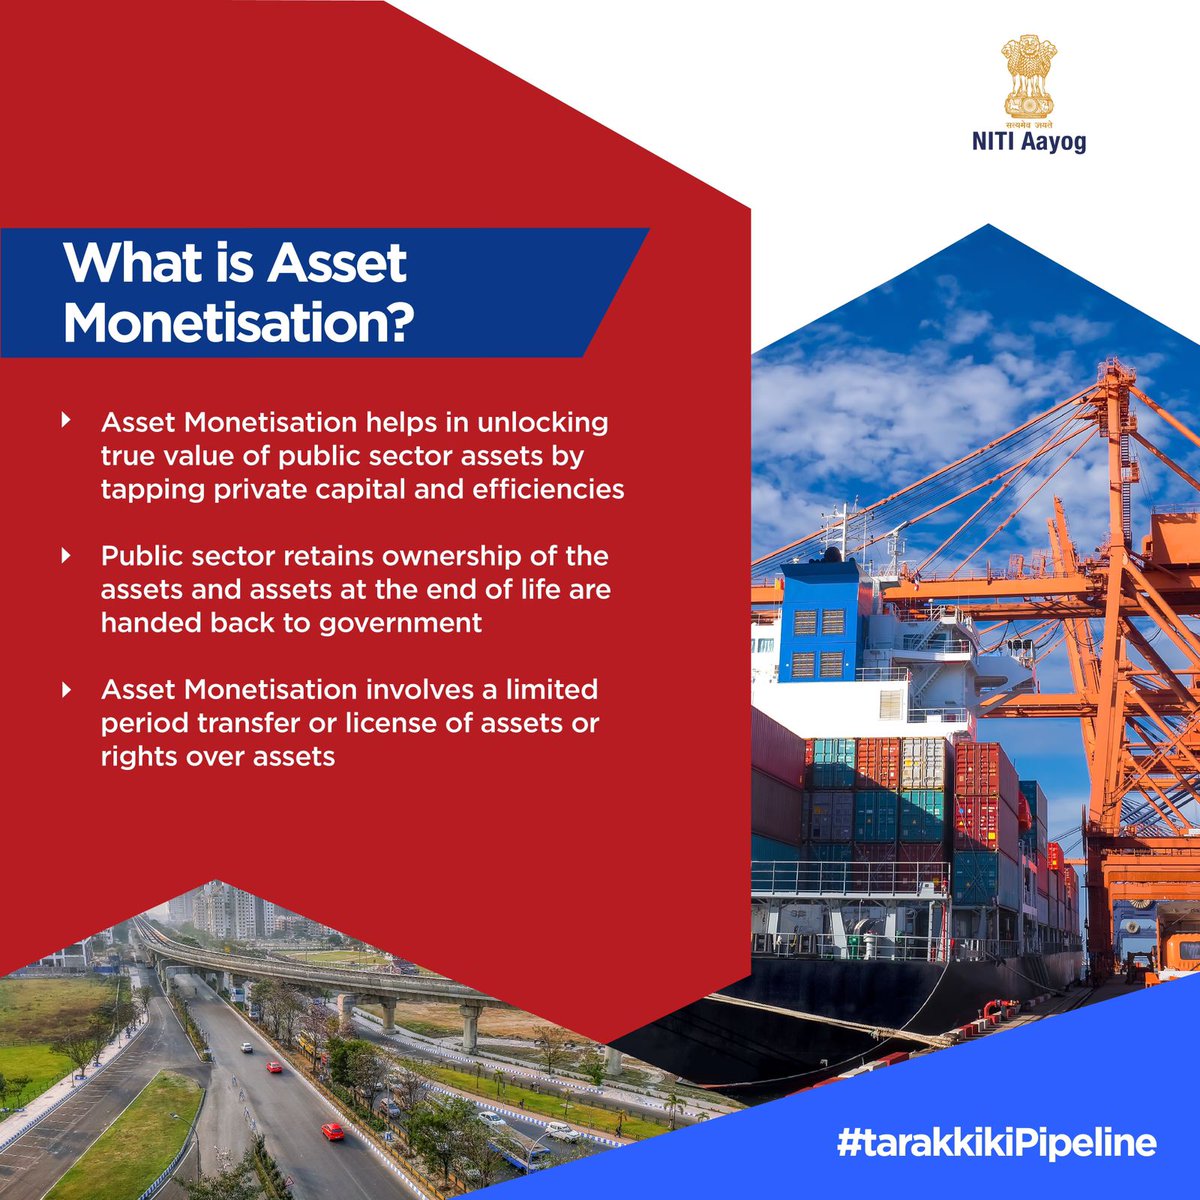 What is #AssetMonetisation? 🤔

Asset Monetisation helps in unlocking the true value of public sector assets by tapping private capital and efficiencies. 

Know more about #NationalMonetisationPipeline, which is India's #TarakkiKiPipeline here -  niti.gov.in/national-monet…